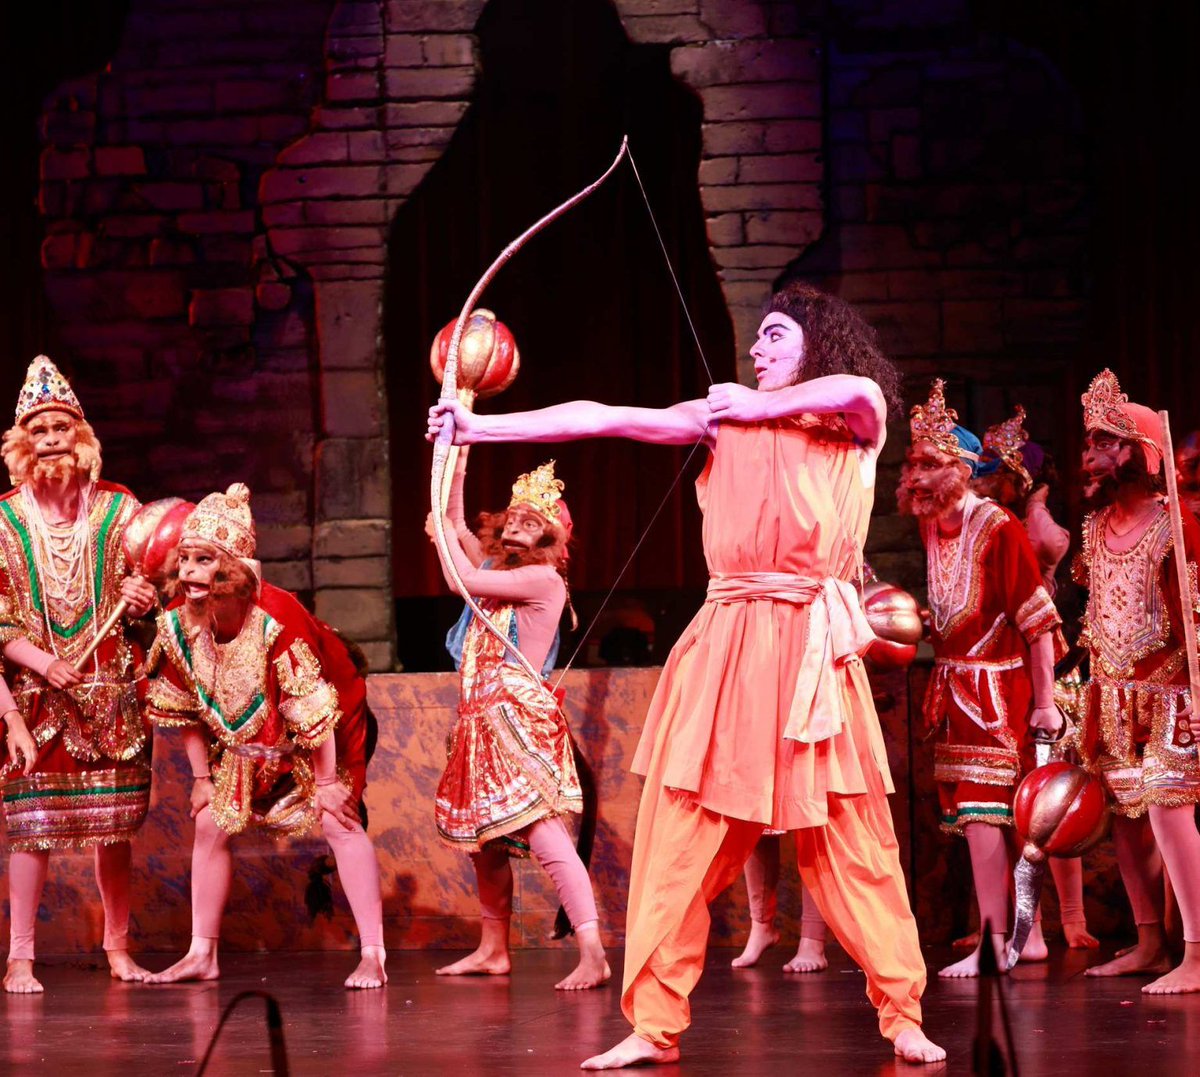 Mount Madonna School presents 45th annual ‘Ramayana!’ musical, a timeless tale for modern audiences 
indicanews.com/mount-madonna-… 
#culture #Hanuman #IndicaNews #MountMadonnaSchool #Ramayana #stateoftheart